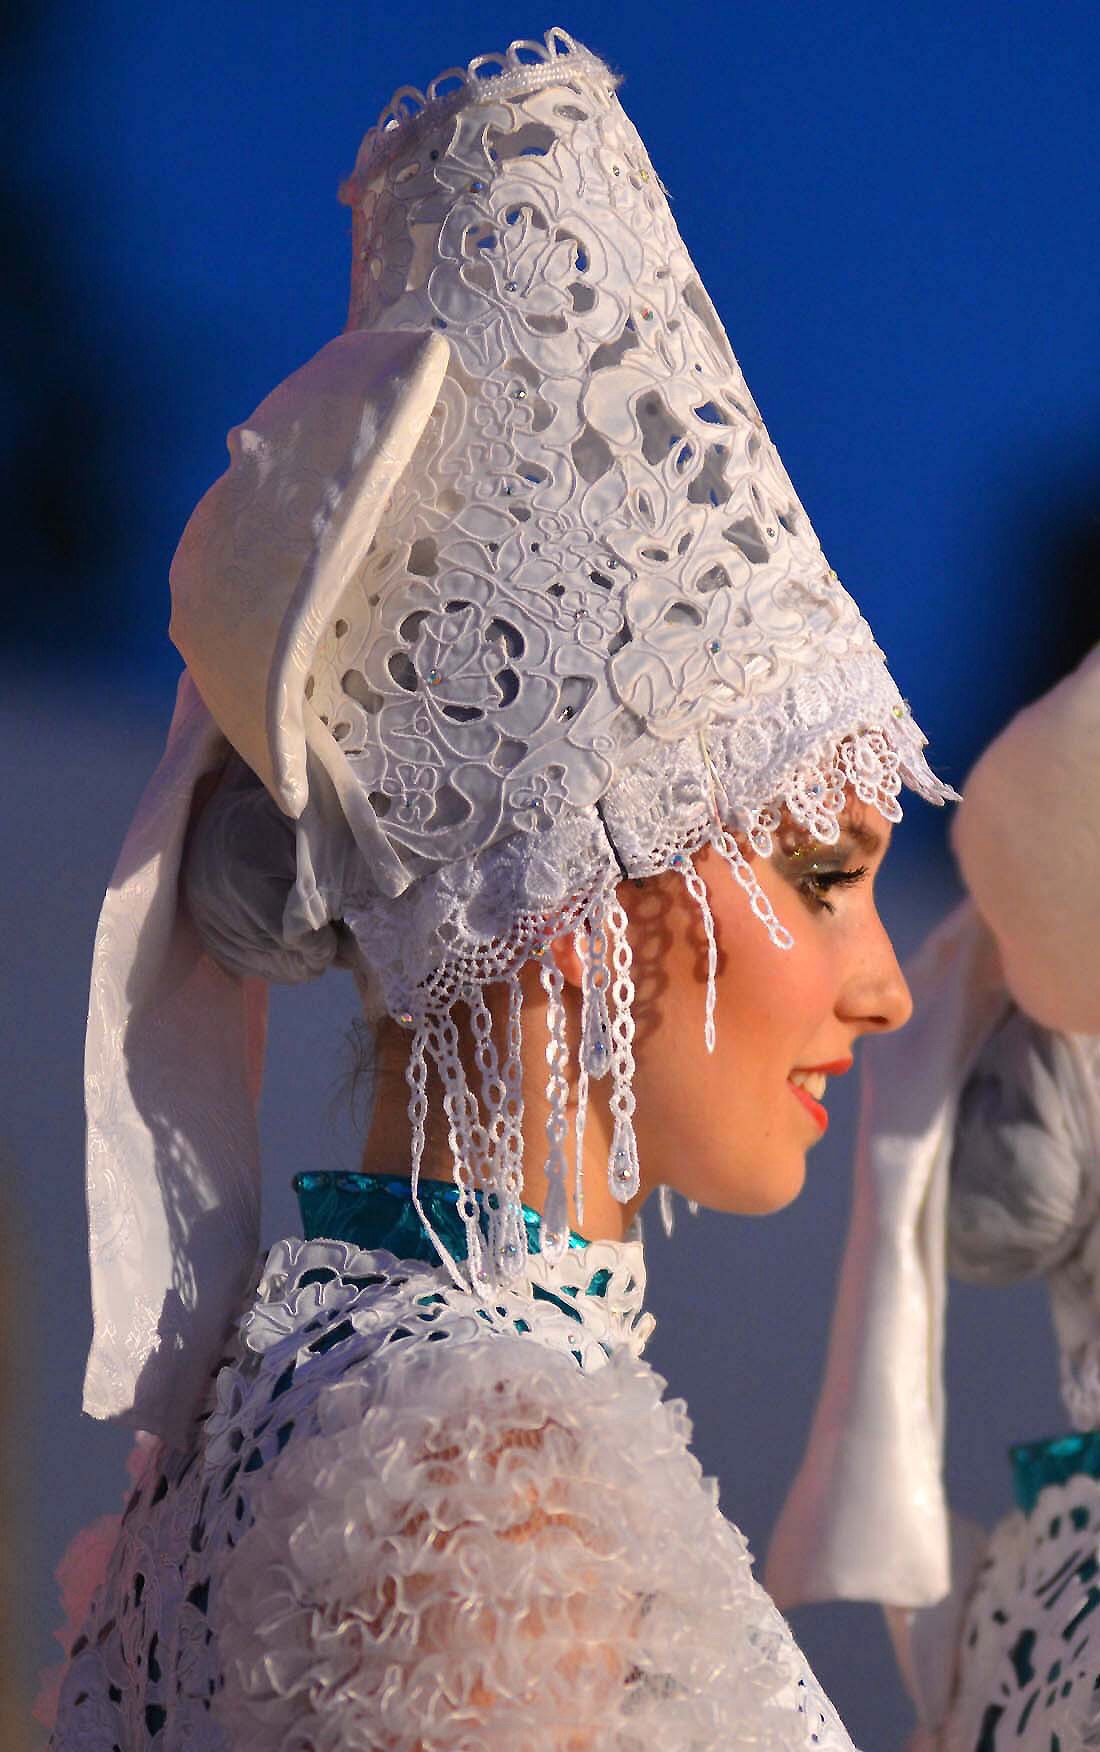 Festival of folklore, a typical Russian beauty!...